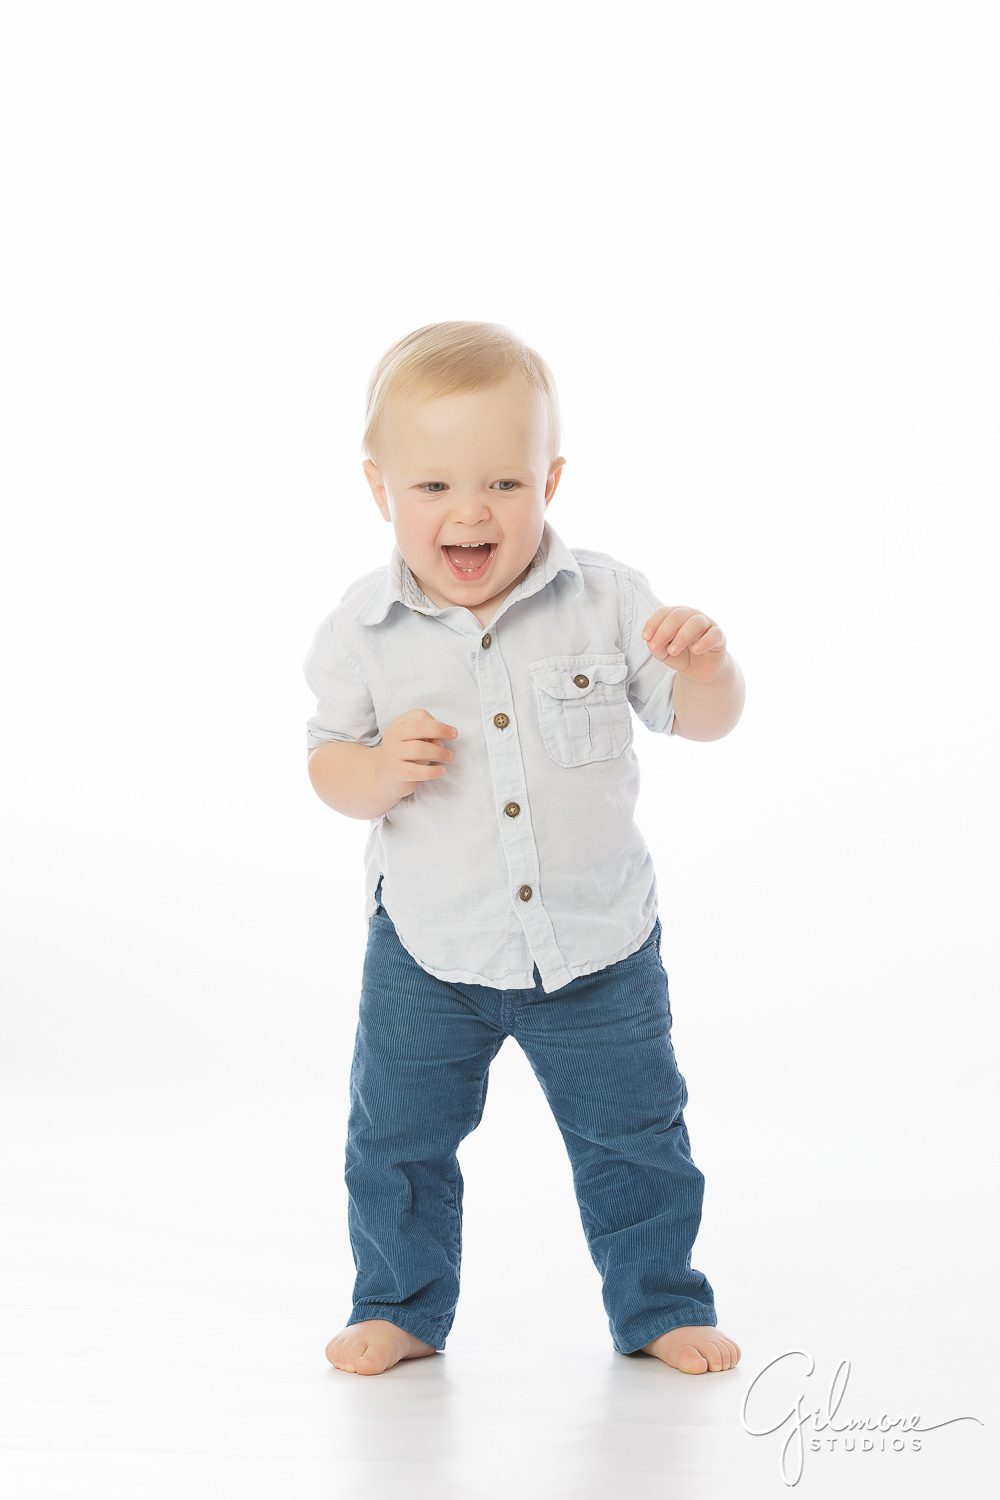 Cowboy Cake Smash, outfit, jeans, shirt, baby, 1st bday, first birthday, portrait session, studio shoot, family